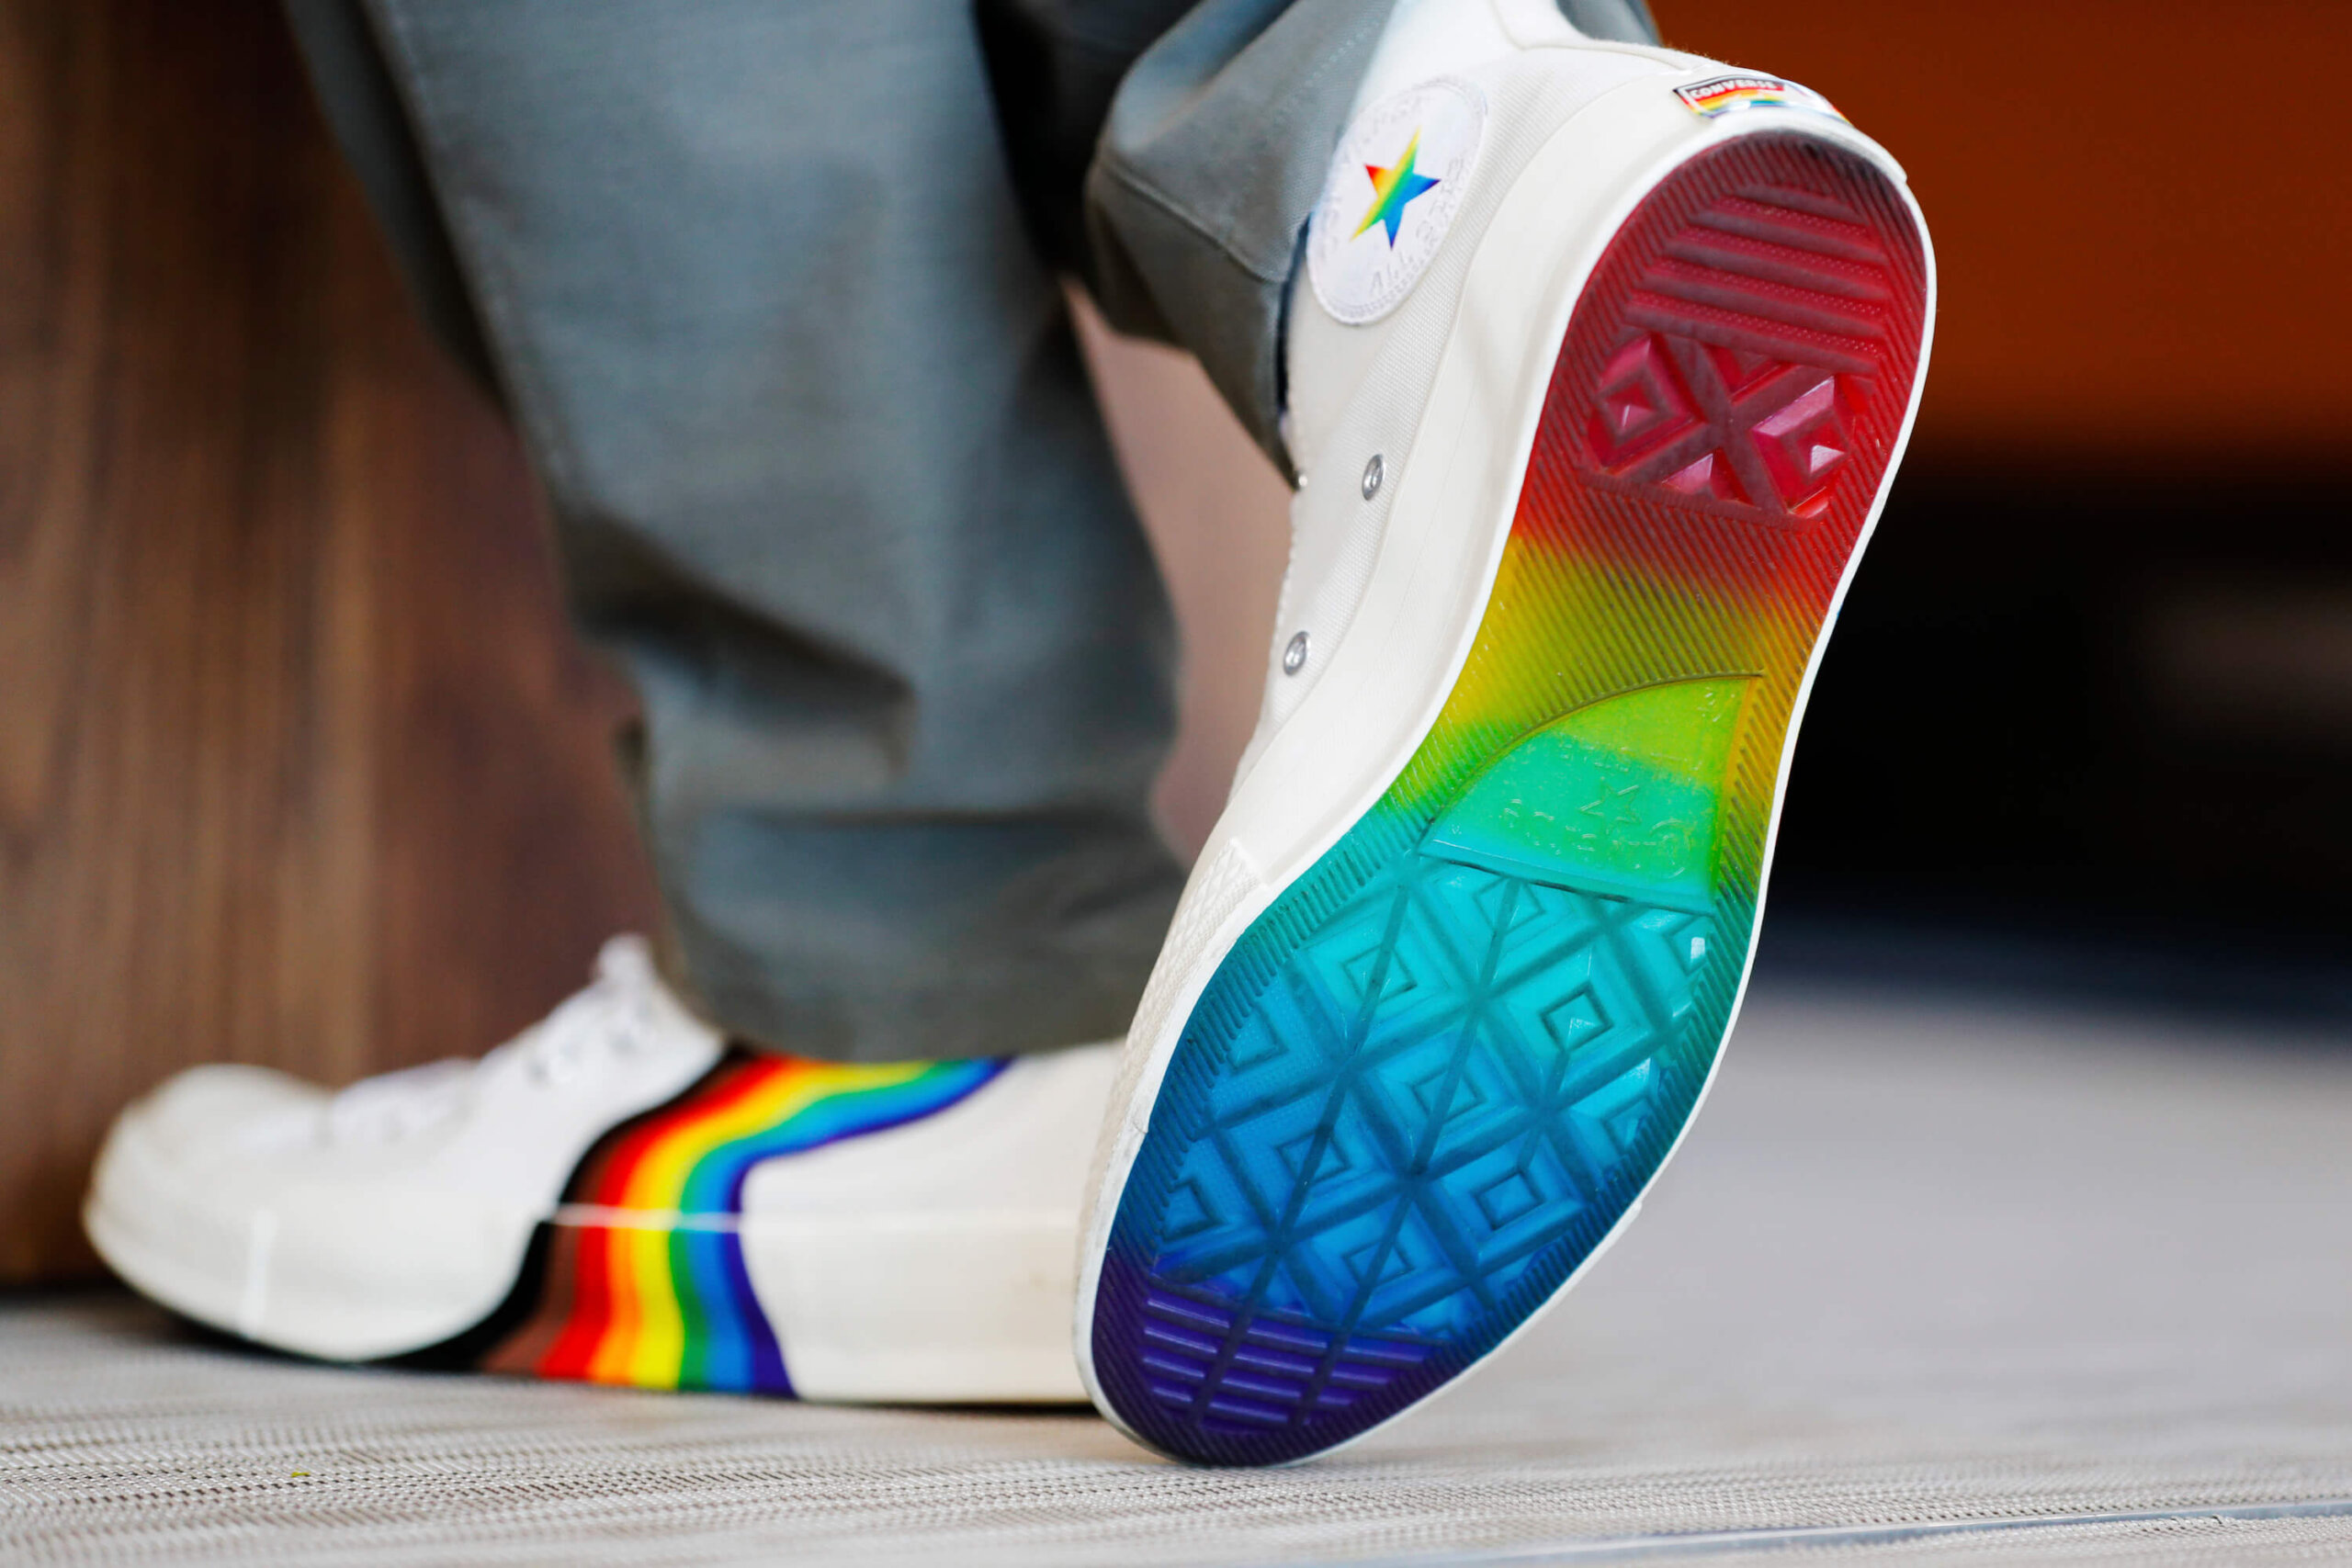 Vettel walks away, showing off his rainbow Converse sneakers, including completely rainbow sole